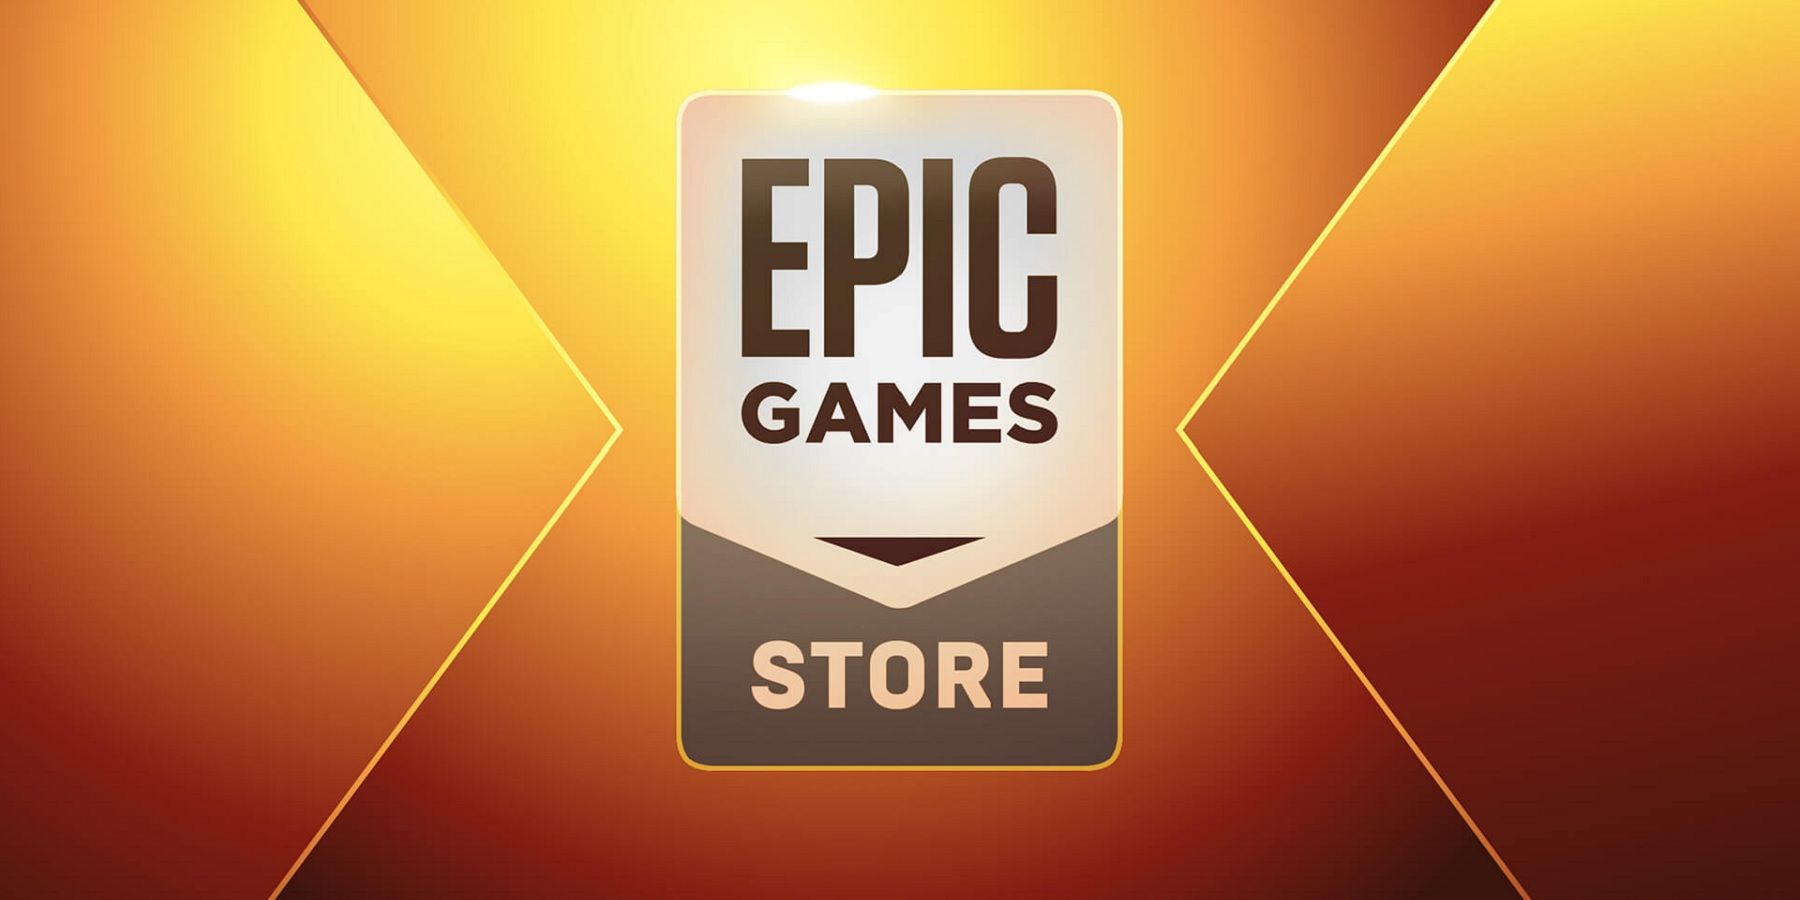 Epic Games Store Teases FREE 'Mystery Game' On 14 May